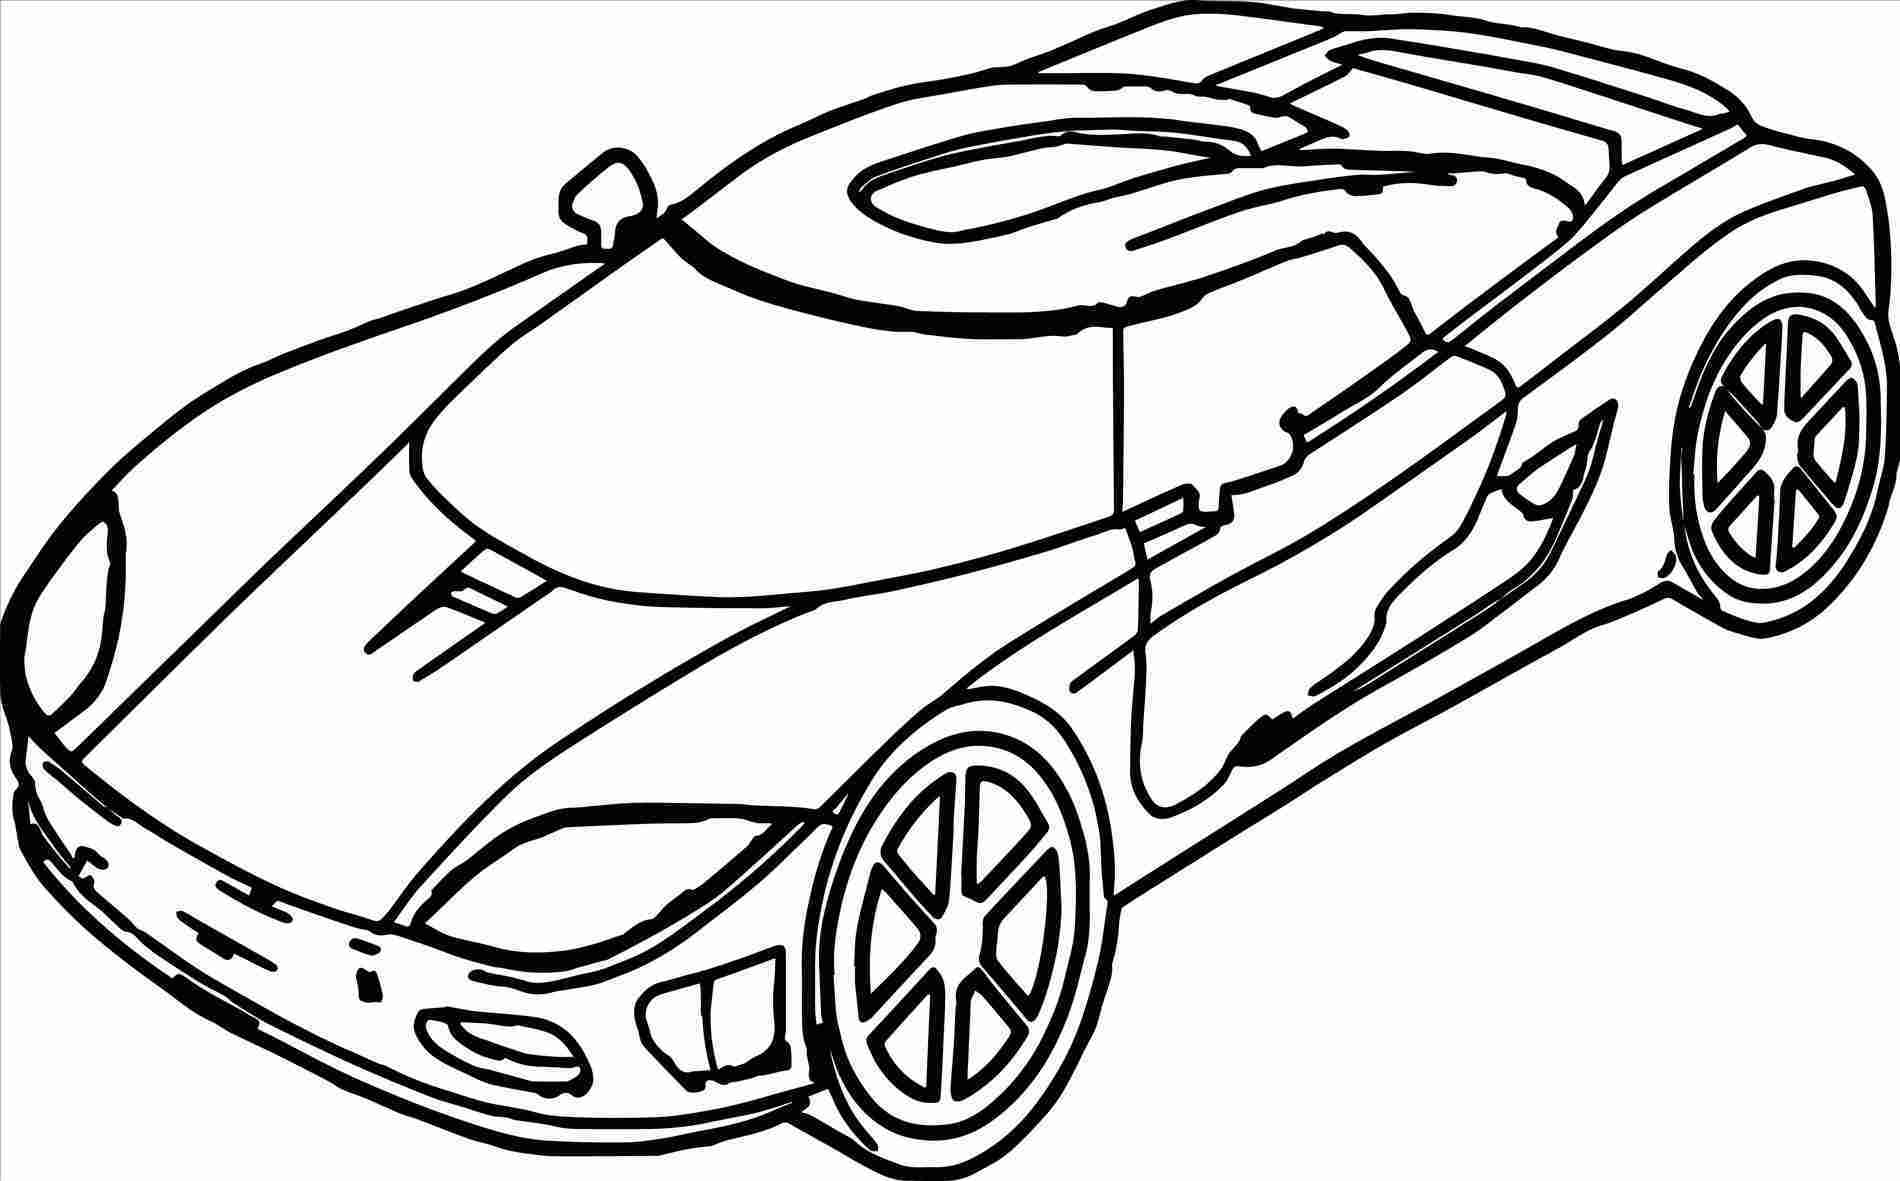 Sports Car Drawing Easy | Free download on ClipArtMag